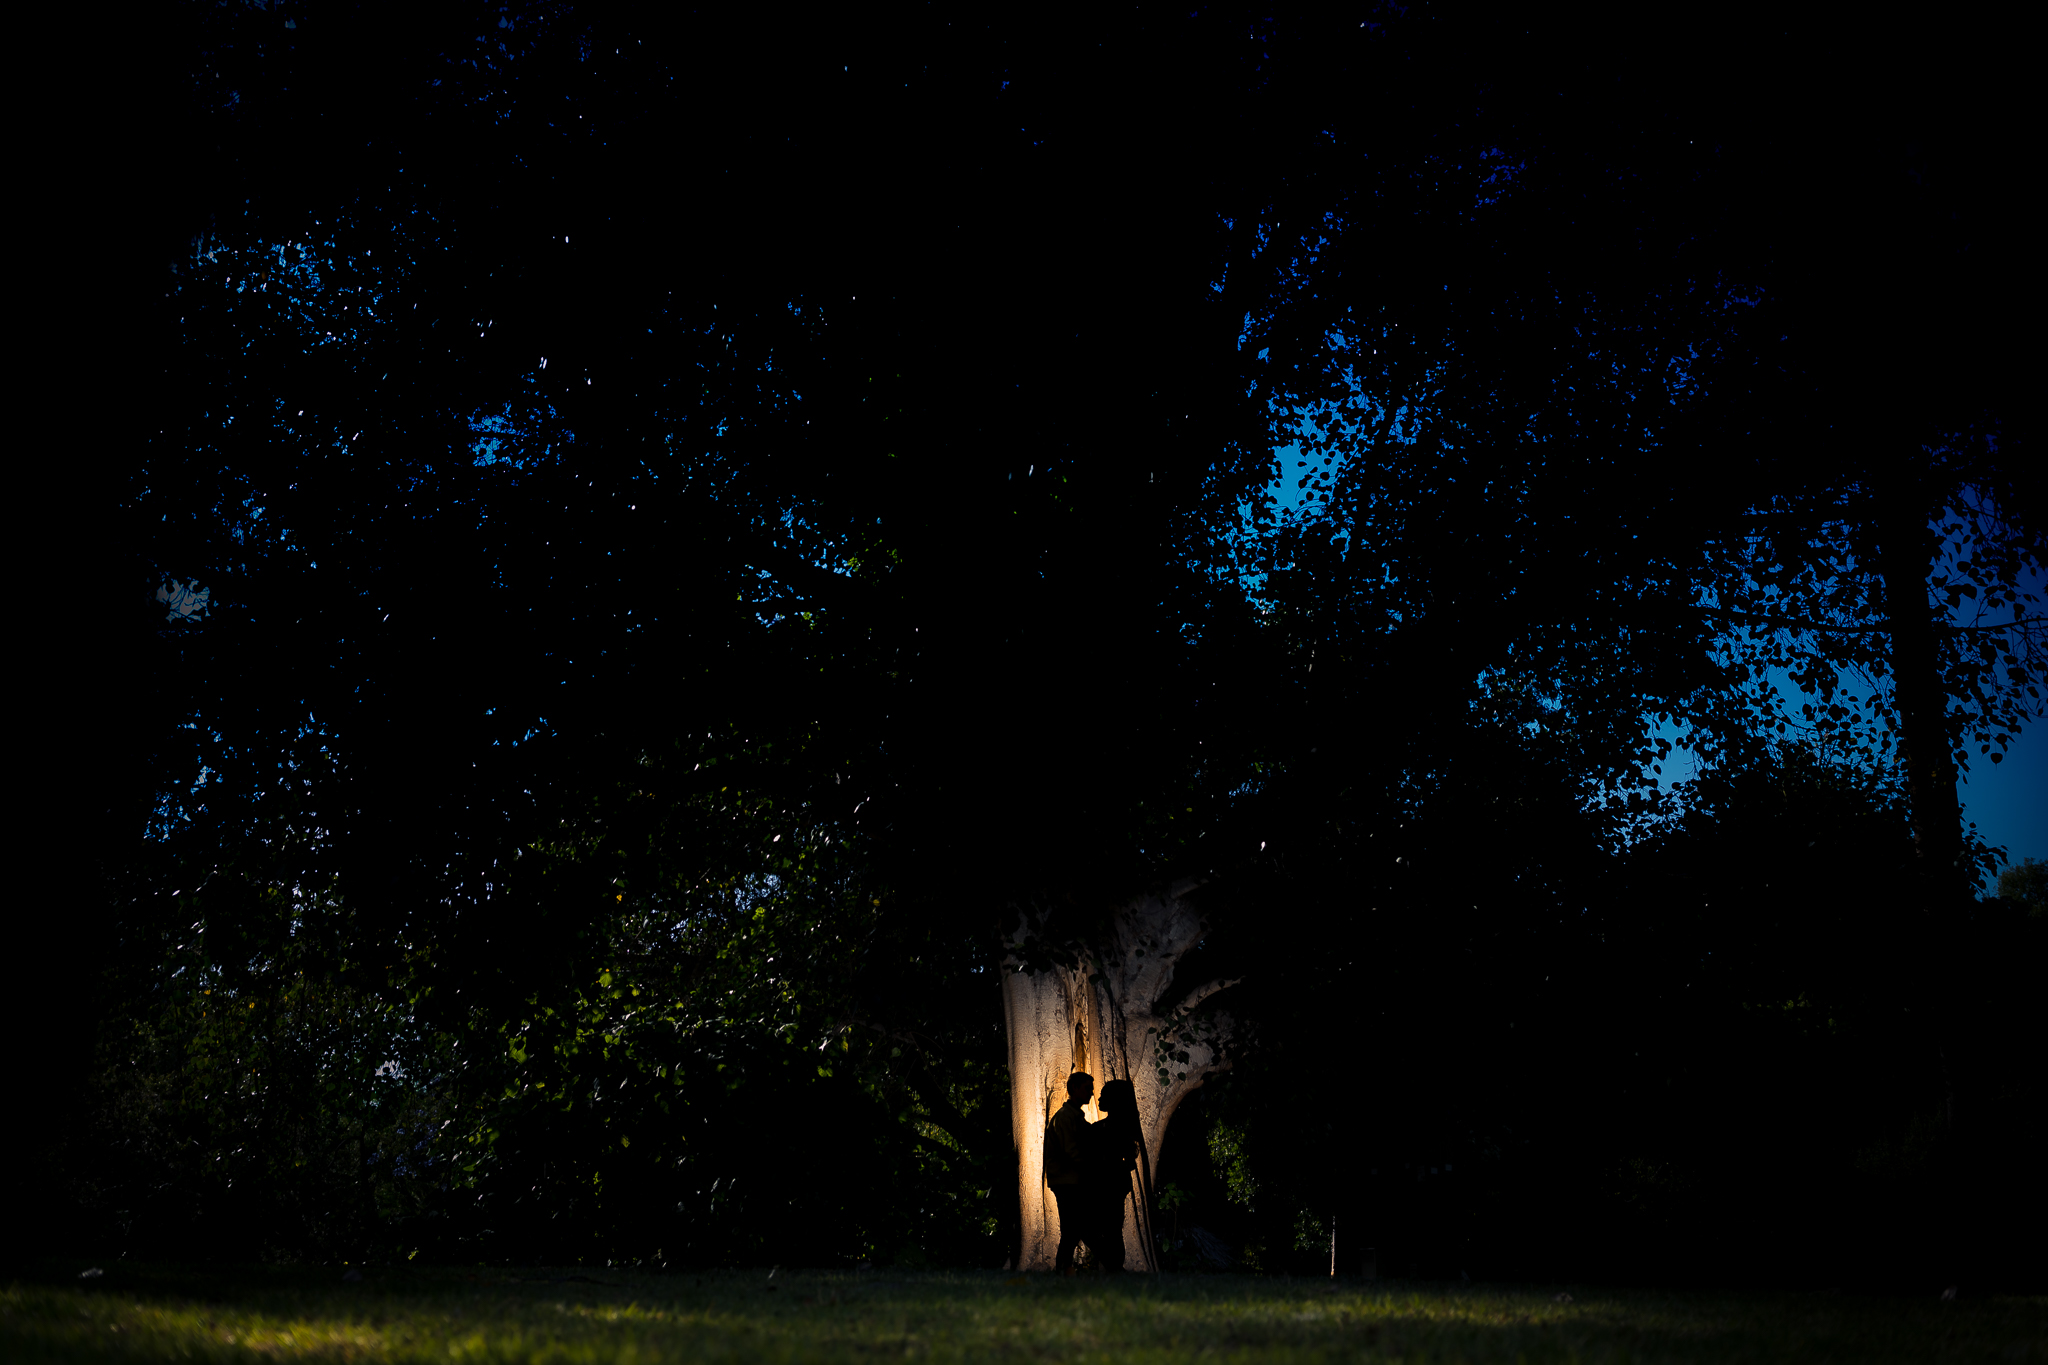 ThomasKim_photography Capturing a couple's love story under a tree at night during engagement photography.